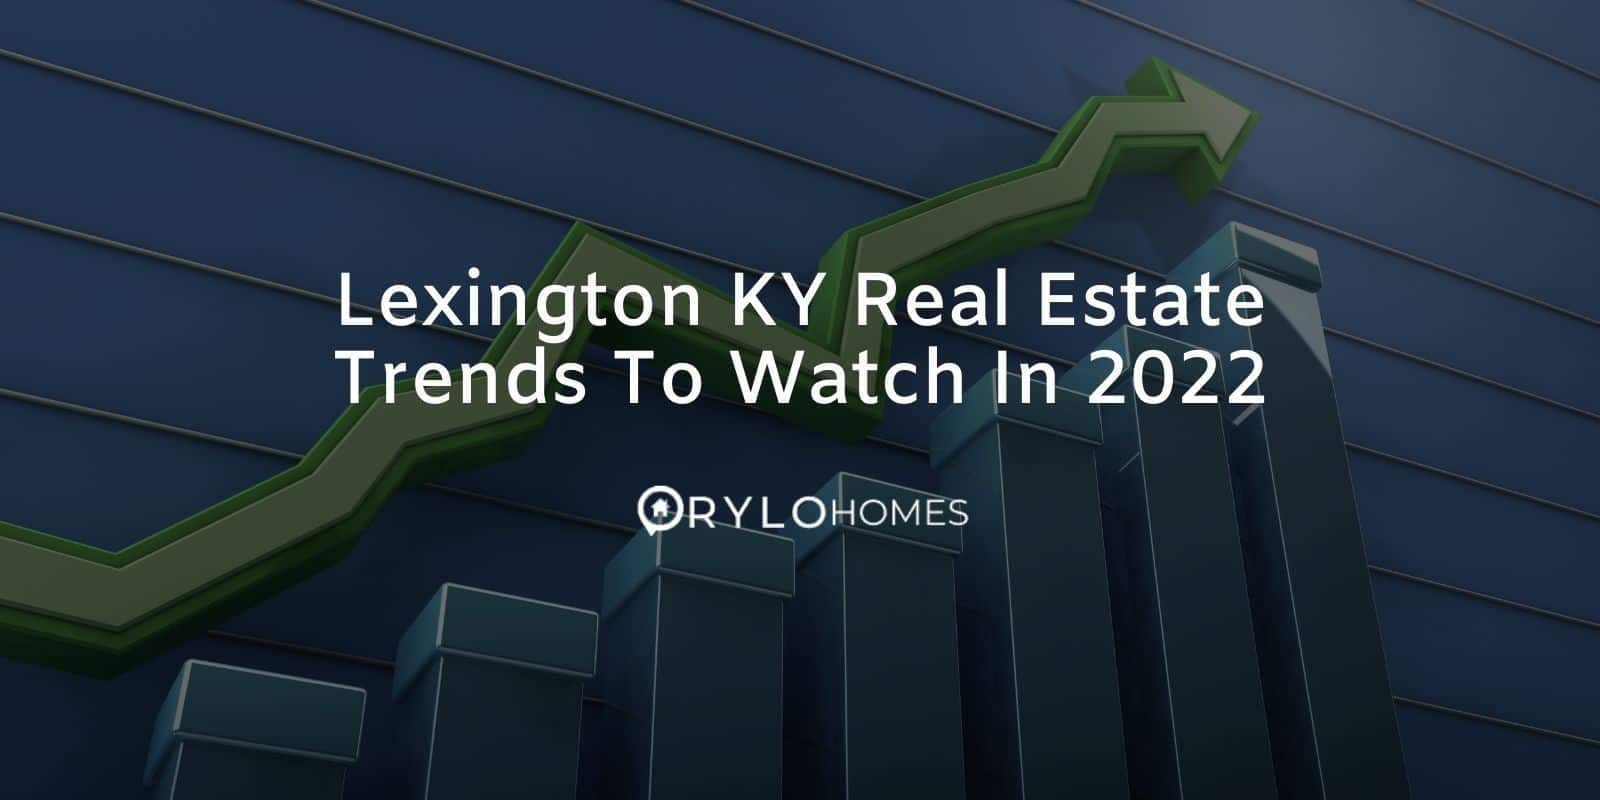 Lexington KY Real Estate Trends To Watch In 2022 